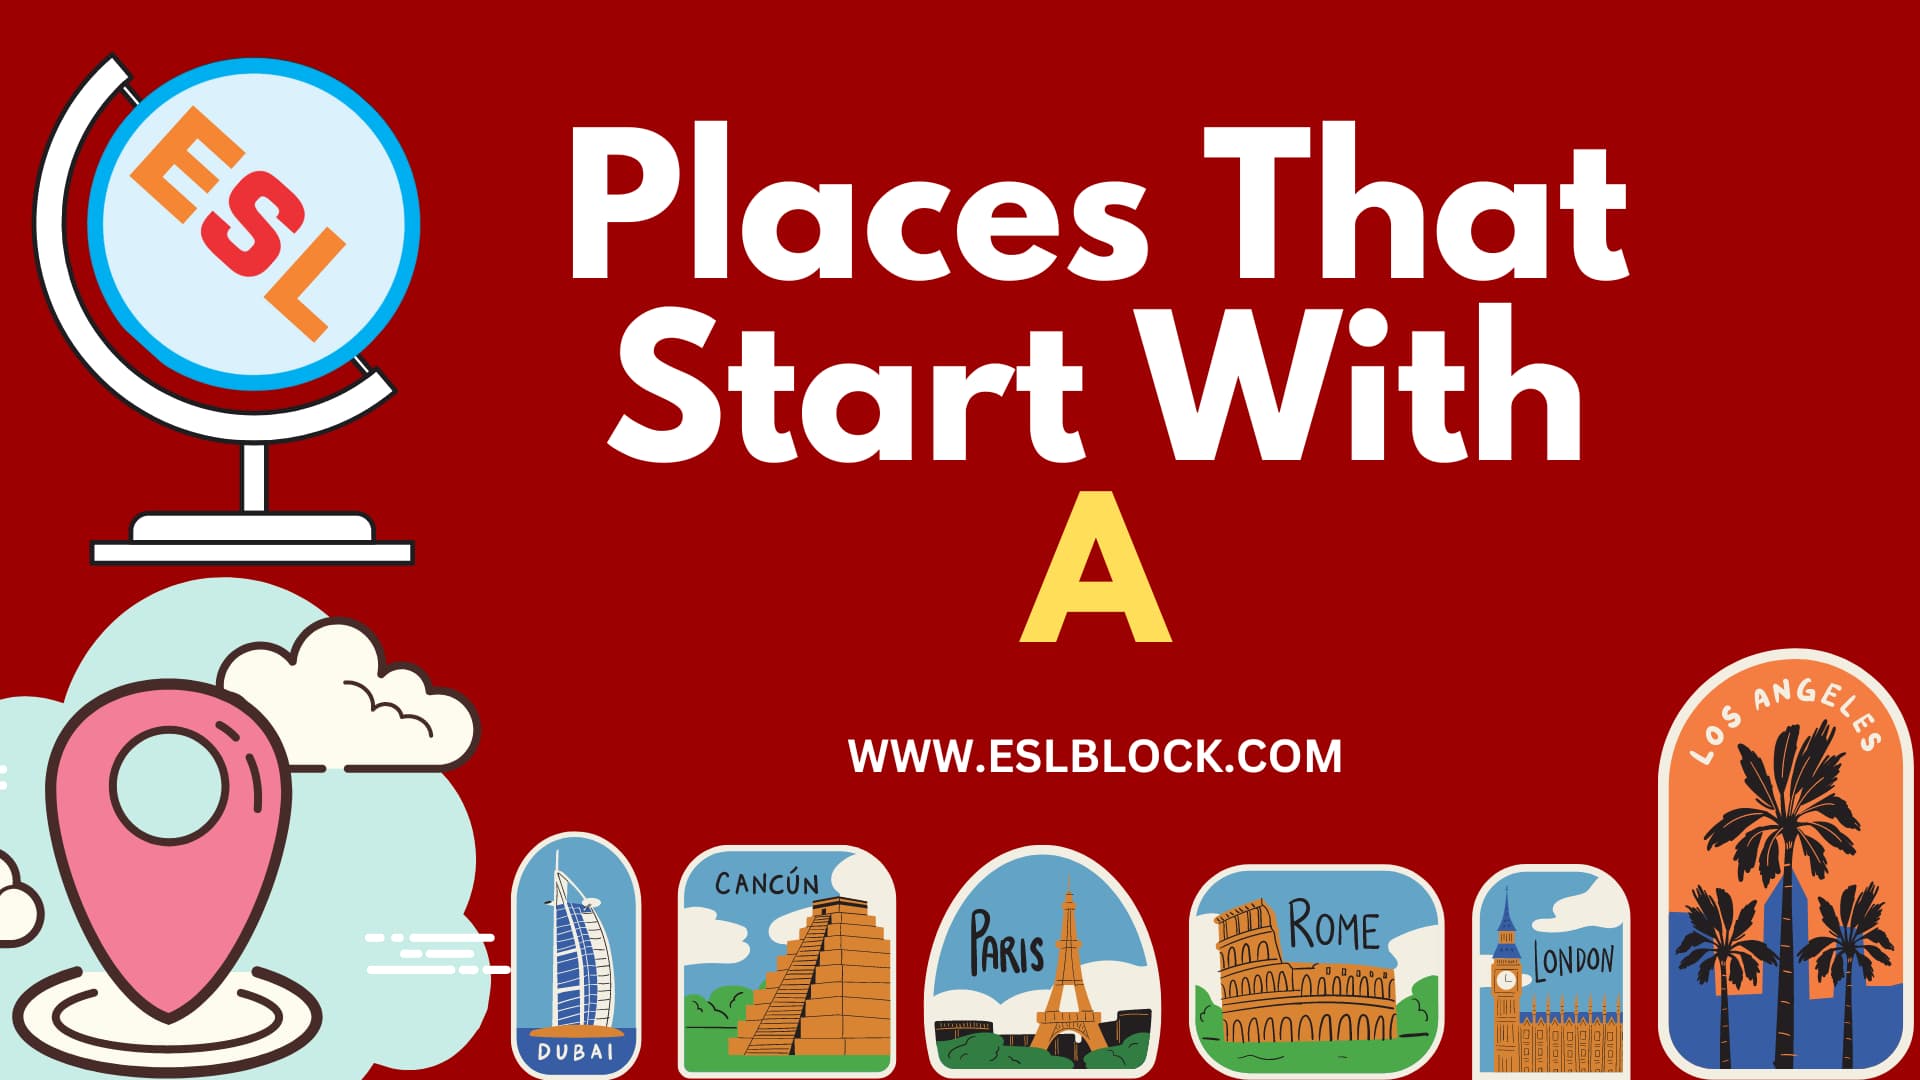 4 Letter Places, 5 Letter Places Starting With A, A Places, A Places in English, A Places Names, English, English Grammar, English Vocabulary, English Words, List of Places That Start With A, Places List, Places Names, Places That Start With A, Vocabulary, Words That Start With a